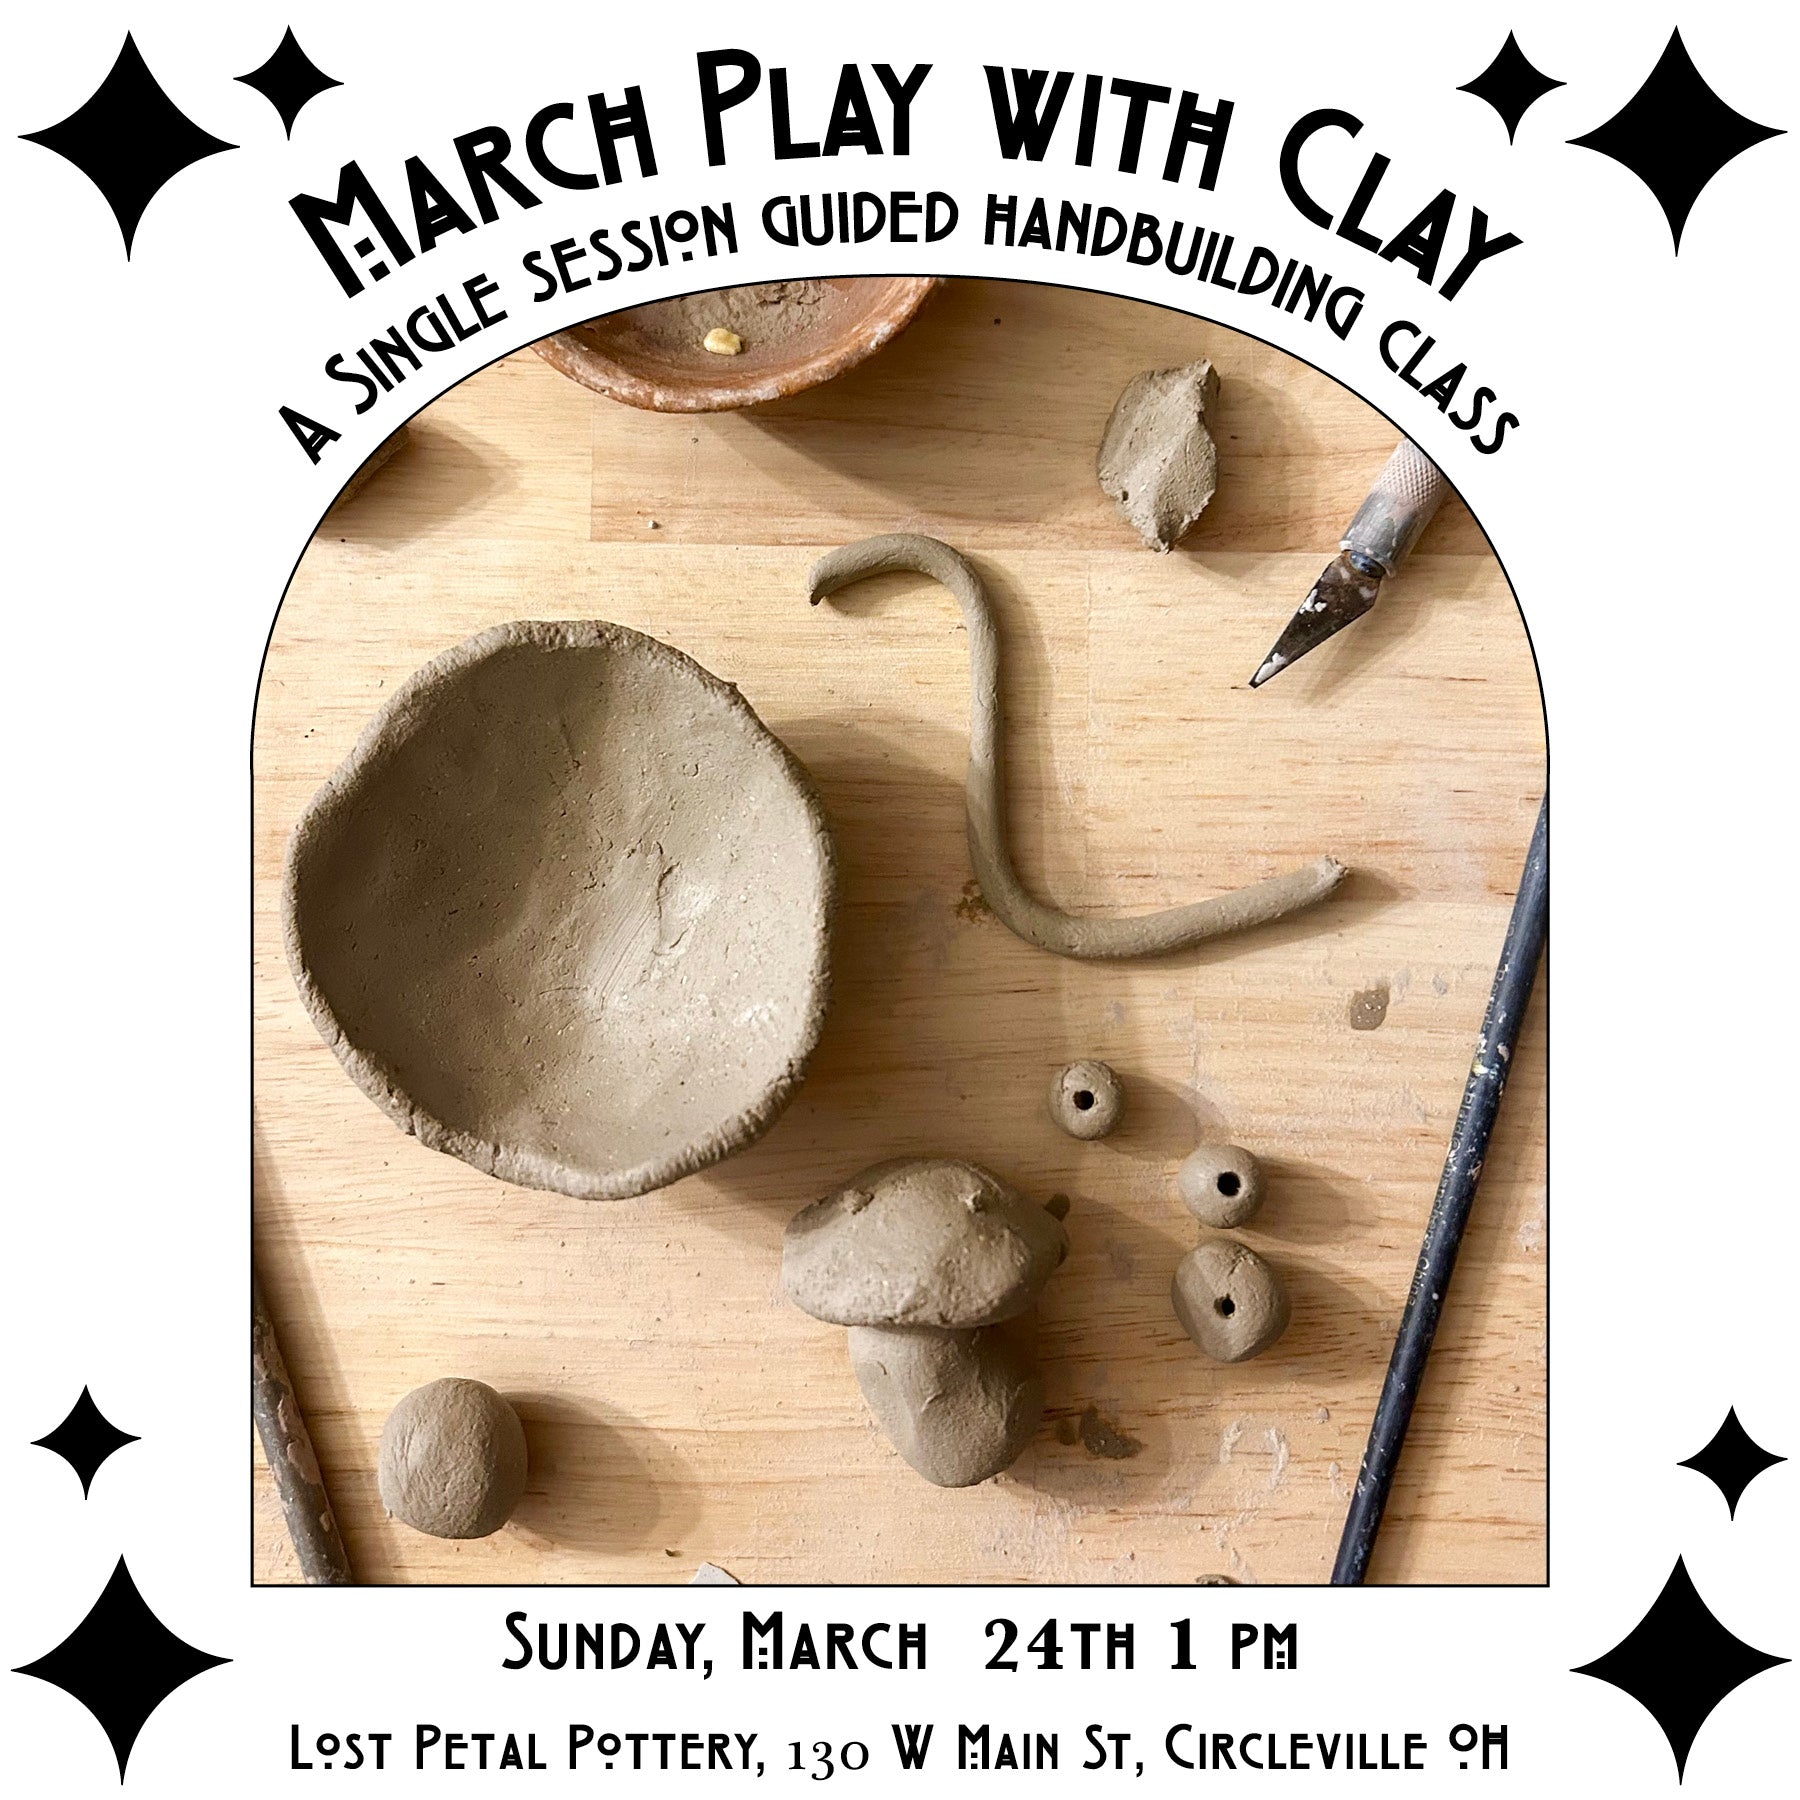 3/24 March Play With Clay - A Healing Playtime Evening for Adults